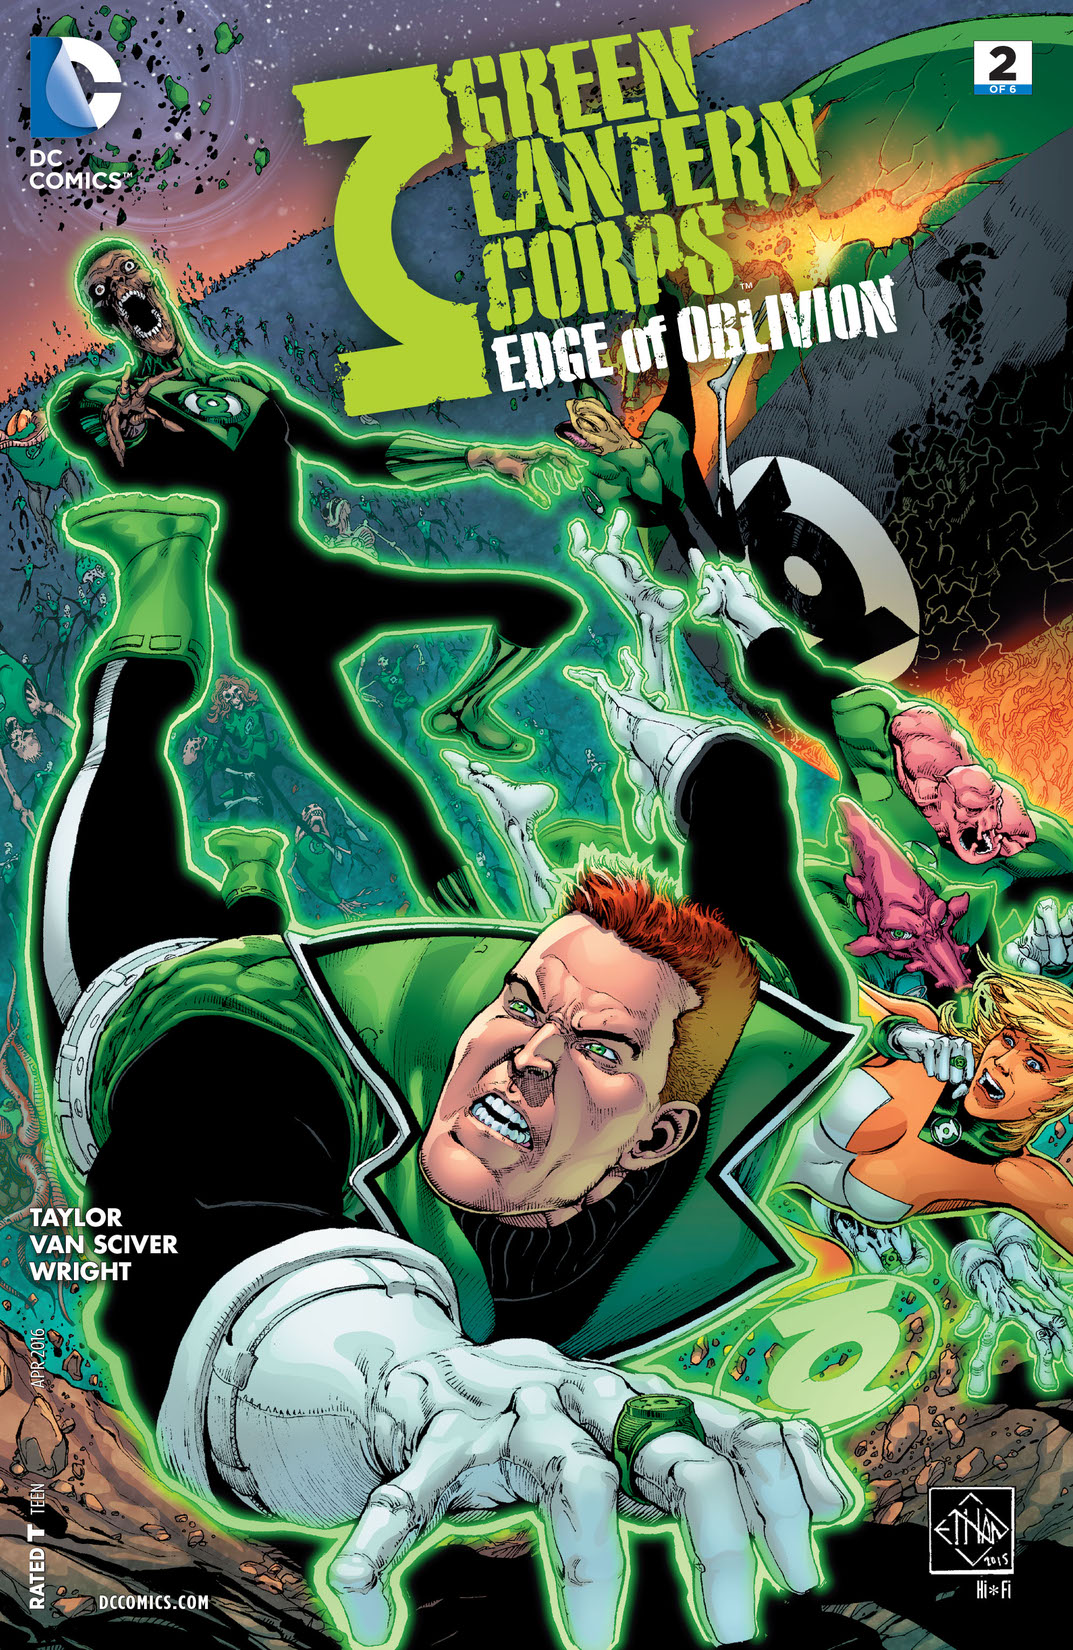 Green Lantern Corps: Edge of Oblivion #2 preview images